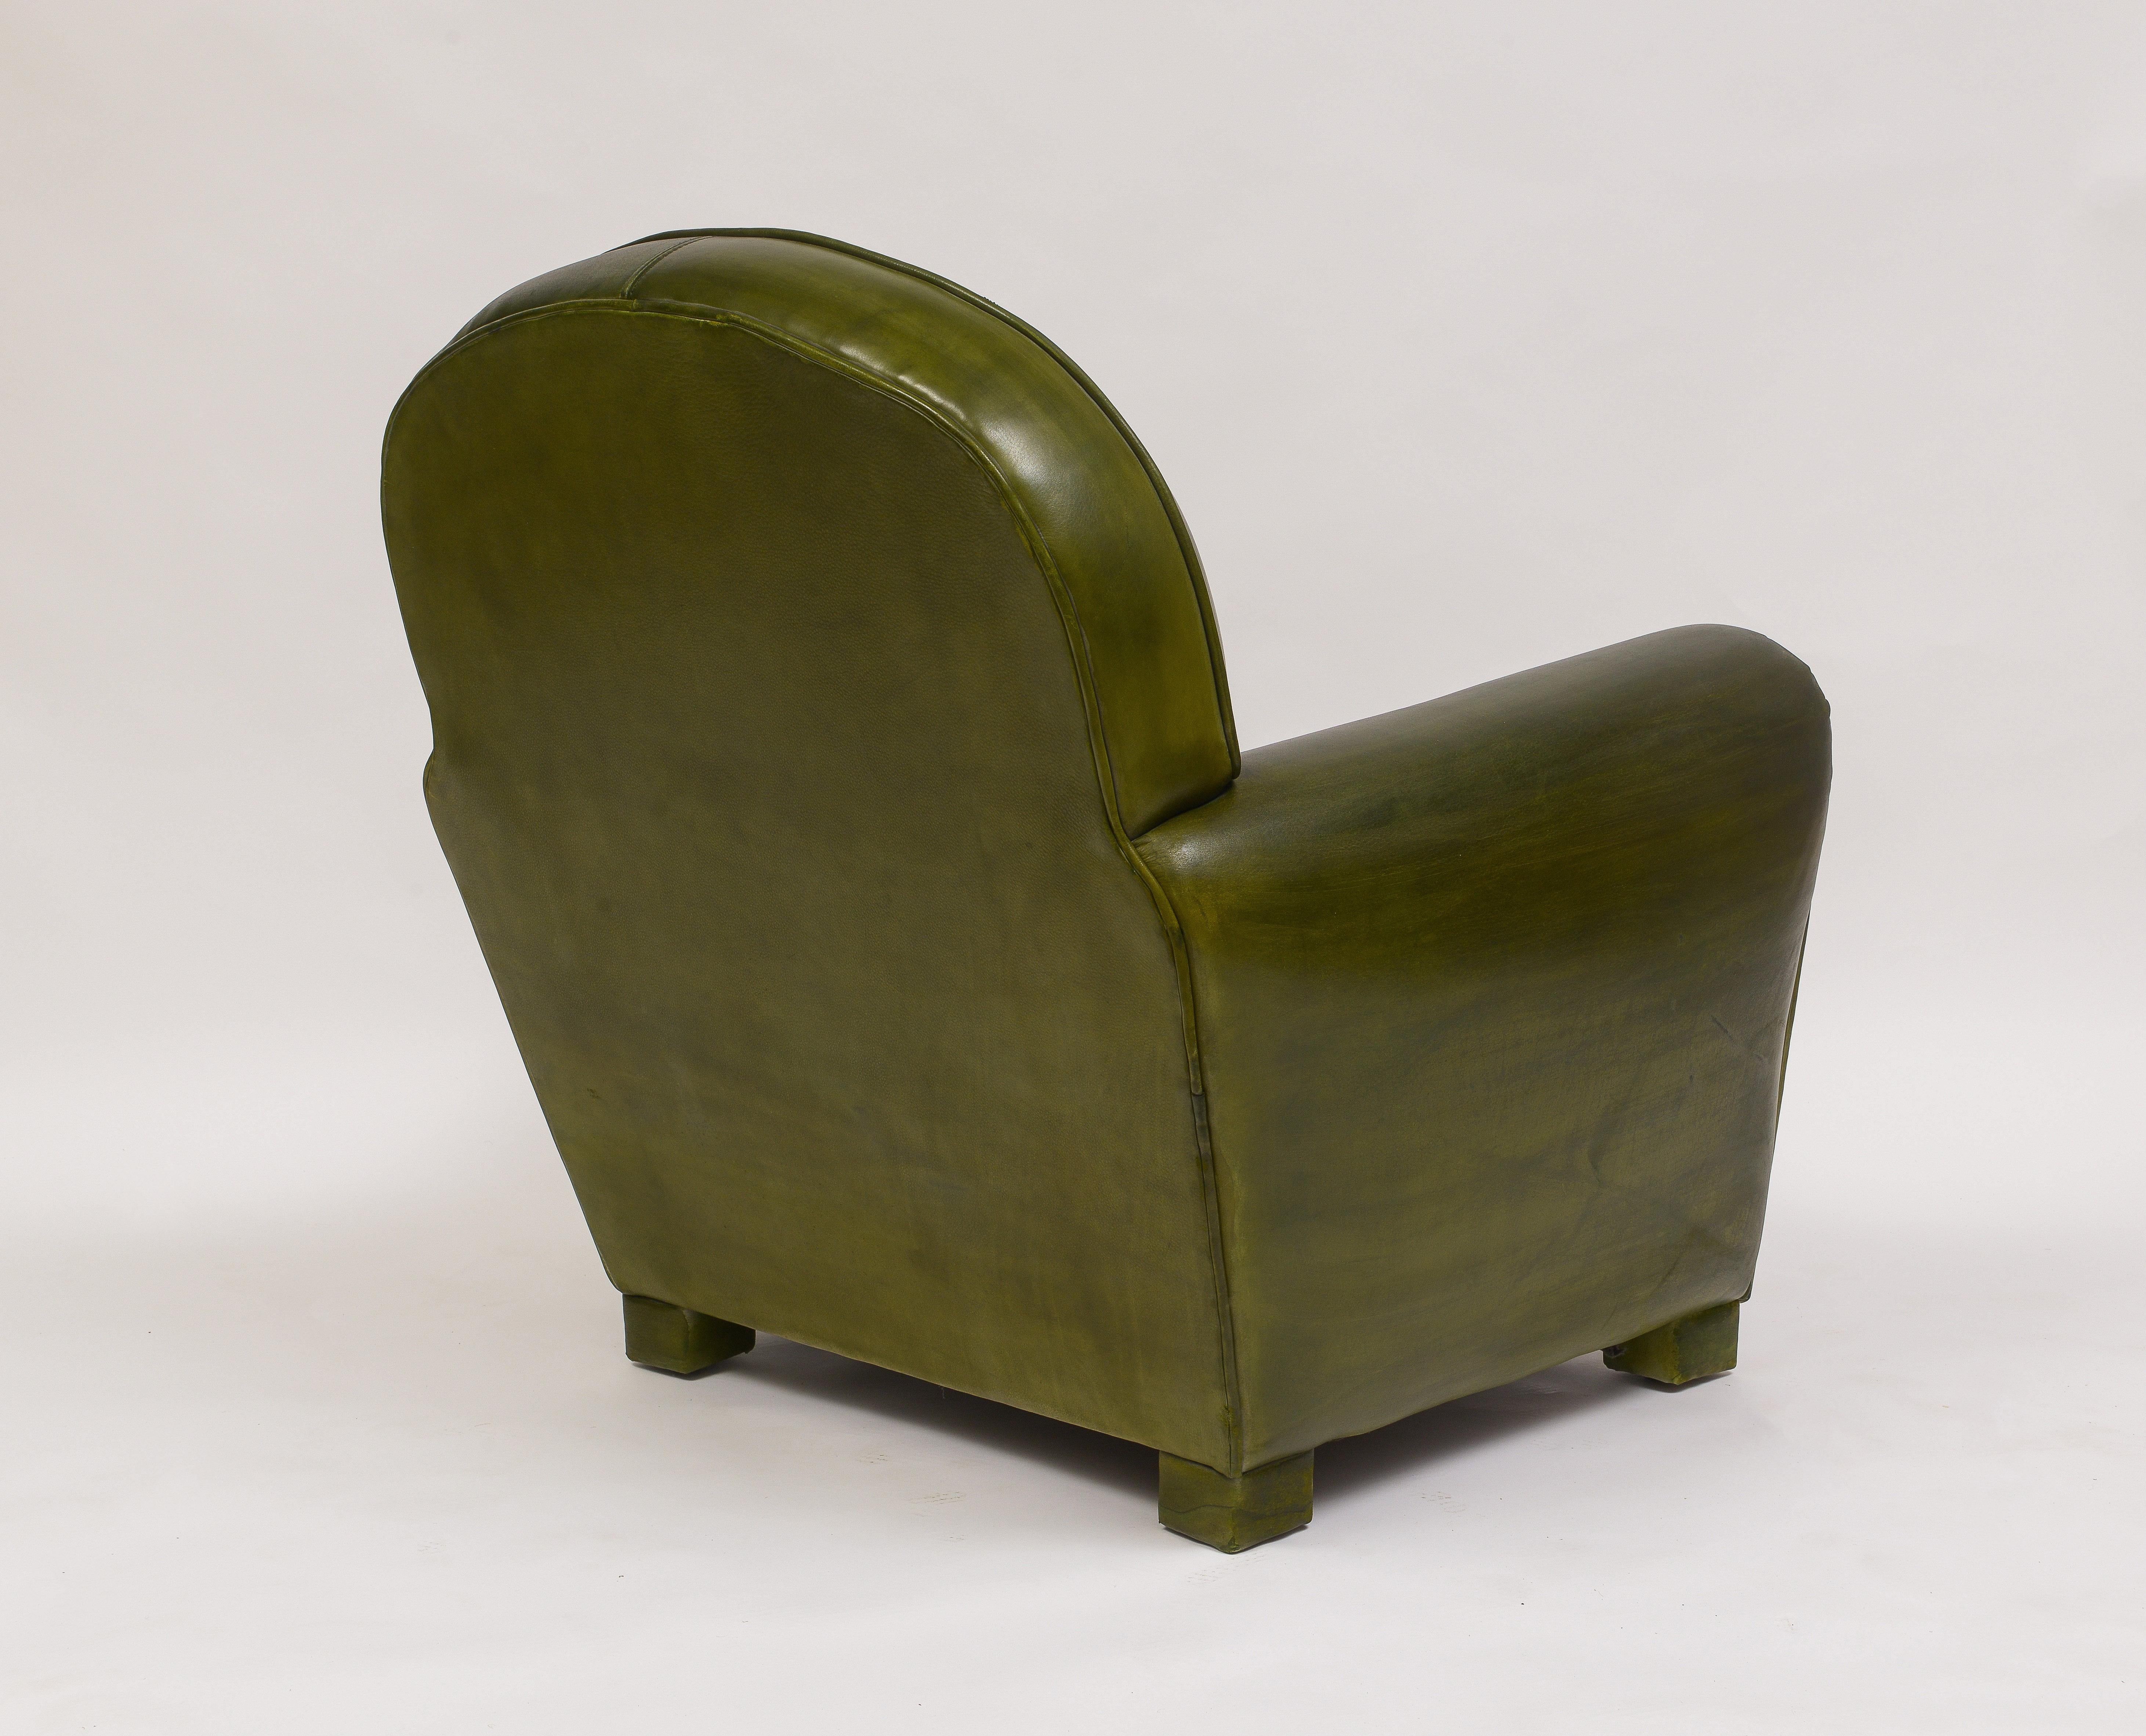 Early 21st Century Green Leather Club Chairs With Ottomans- 4 Pieces For Sale 2